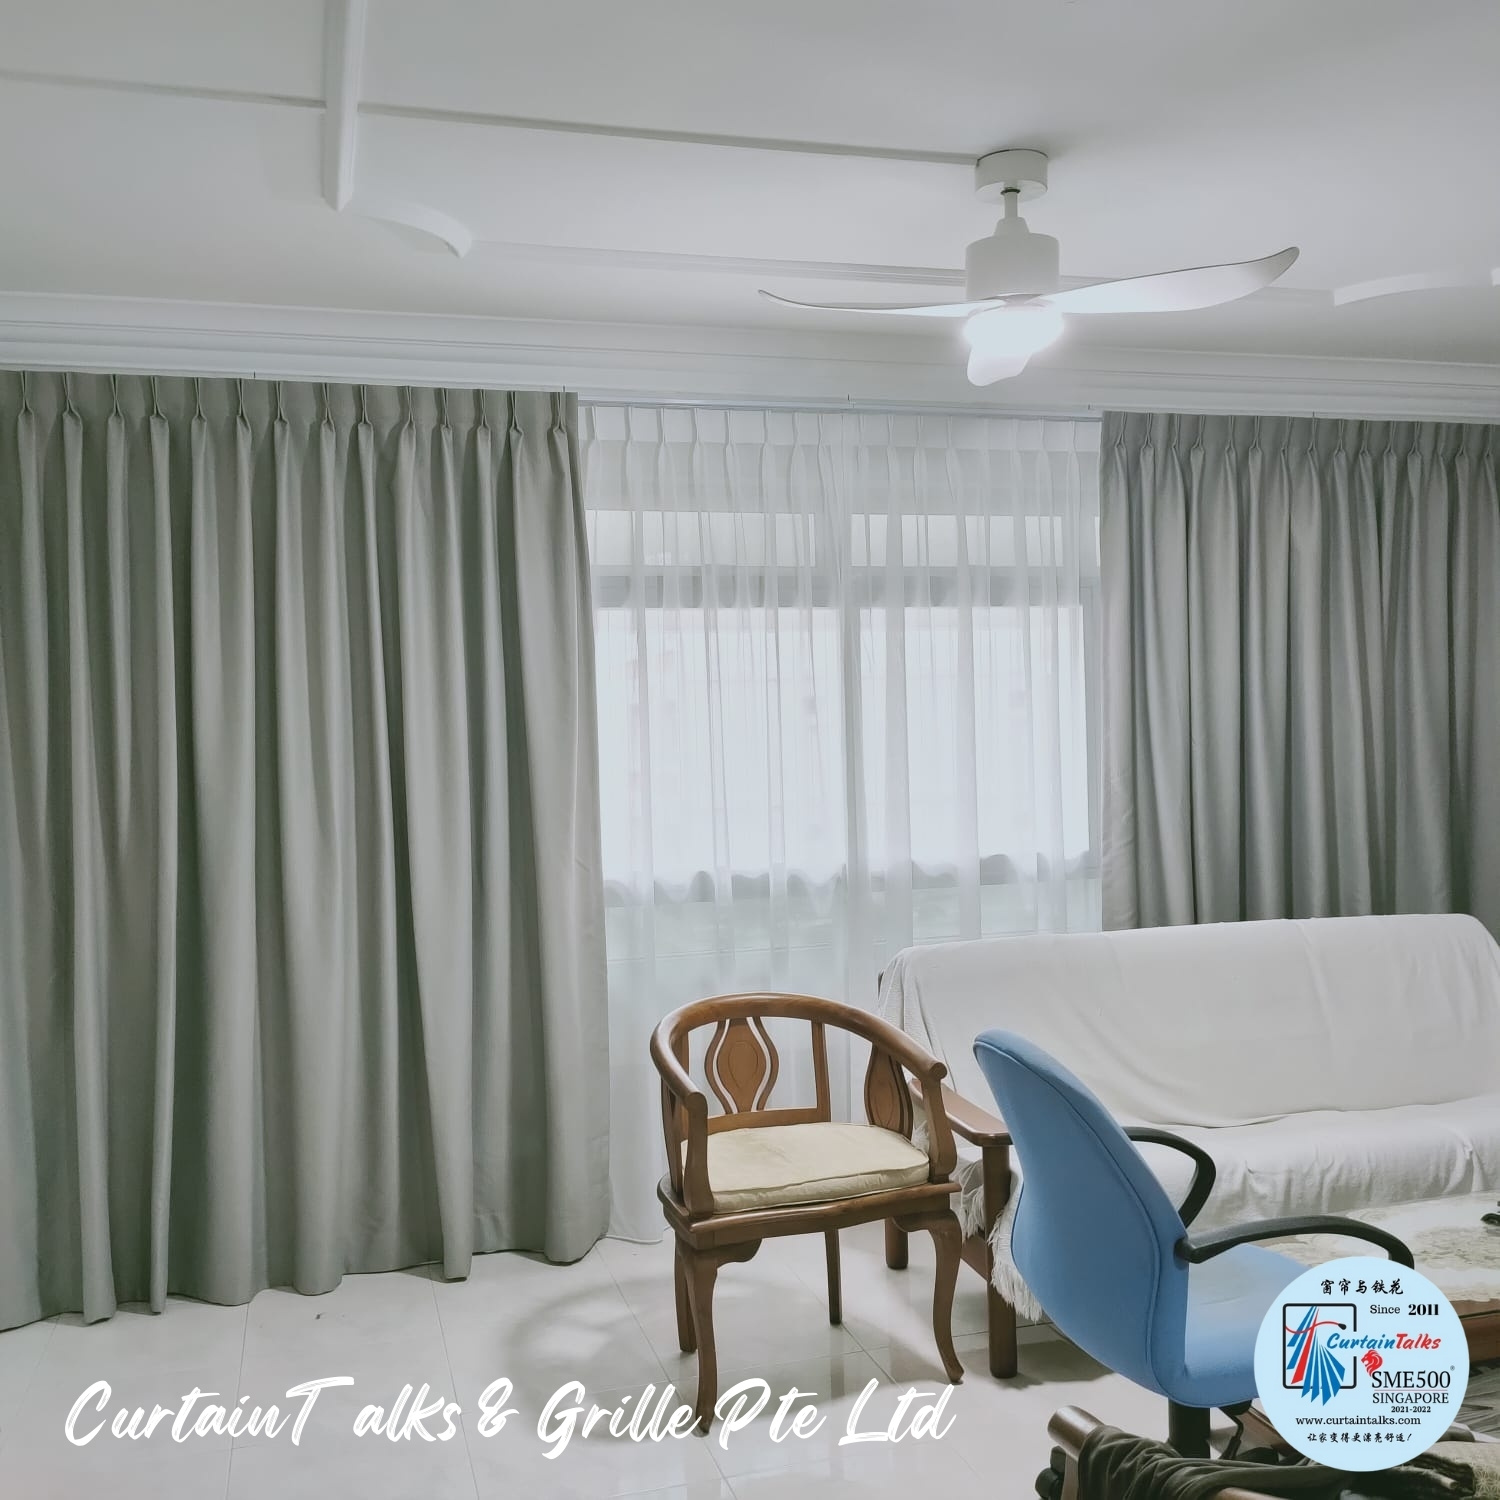 This is a Picture of Day and night curtain picture  for Singapore HDB BLK 221 Paris Ris St 21, day and night curtain for living hall, 